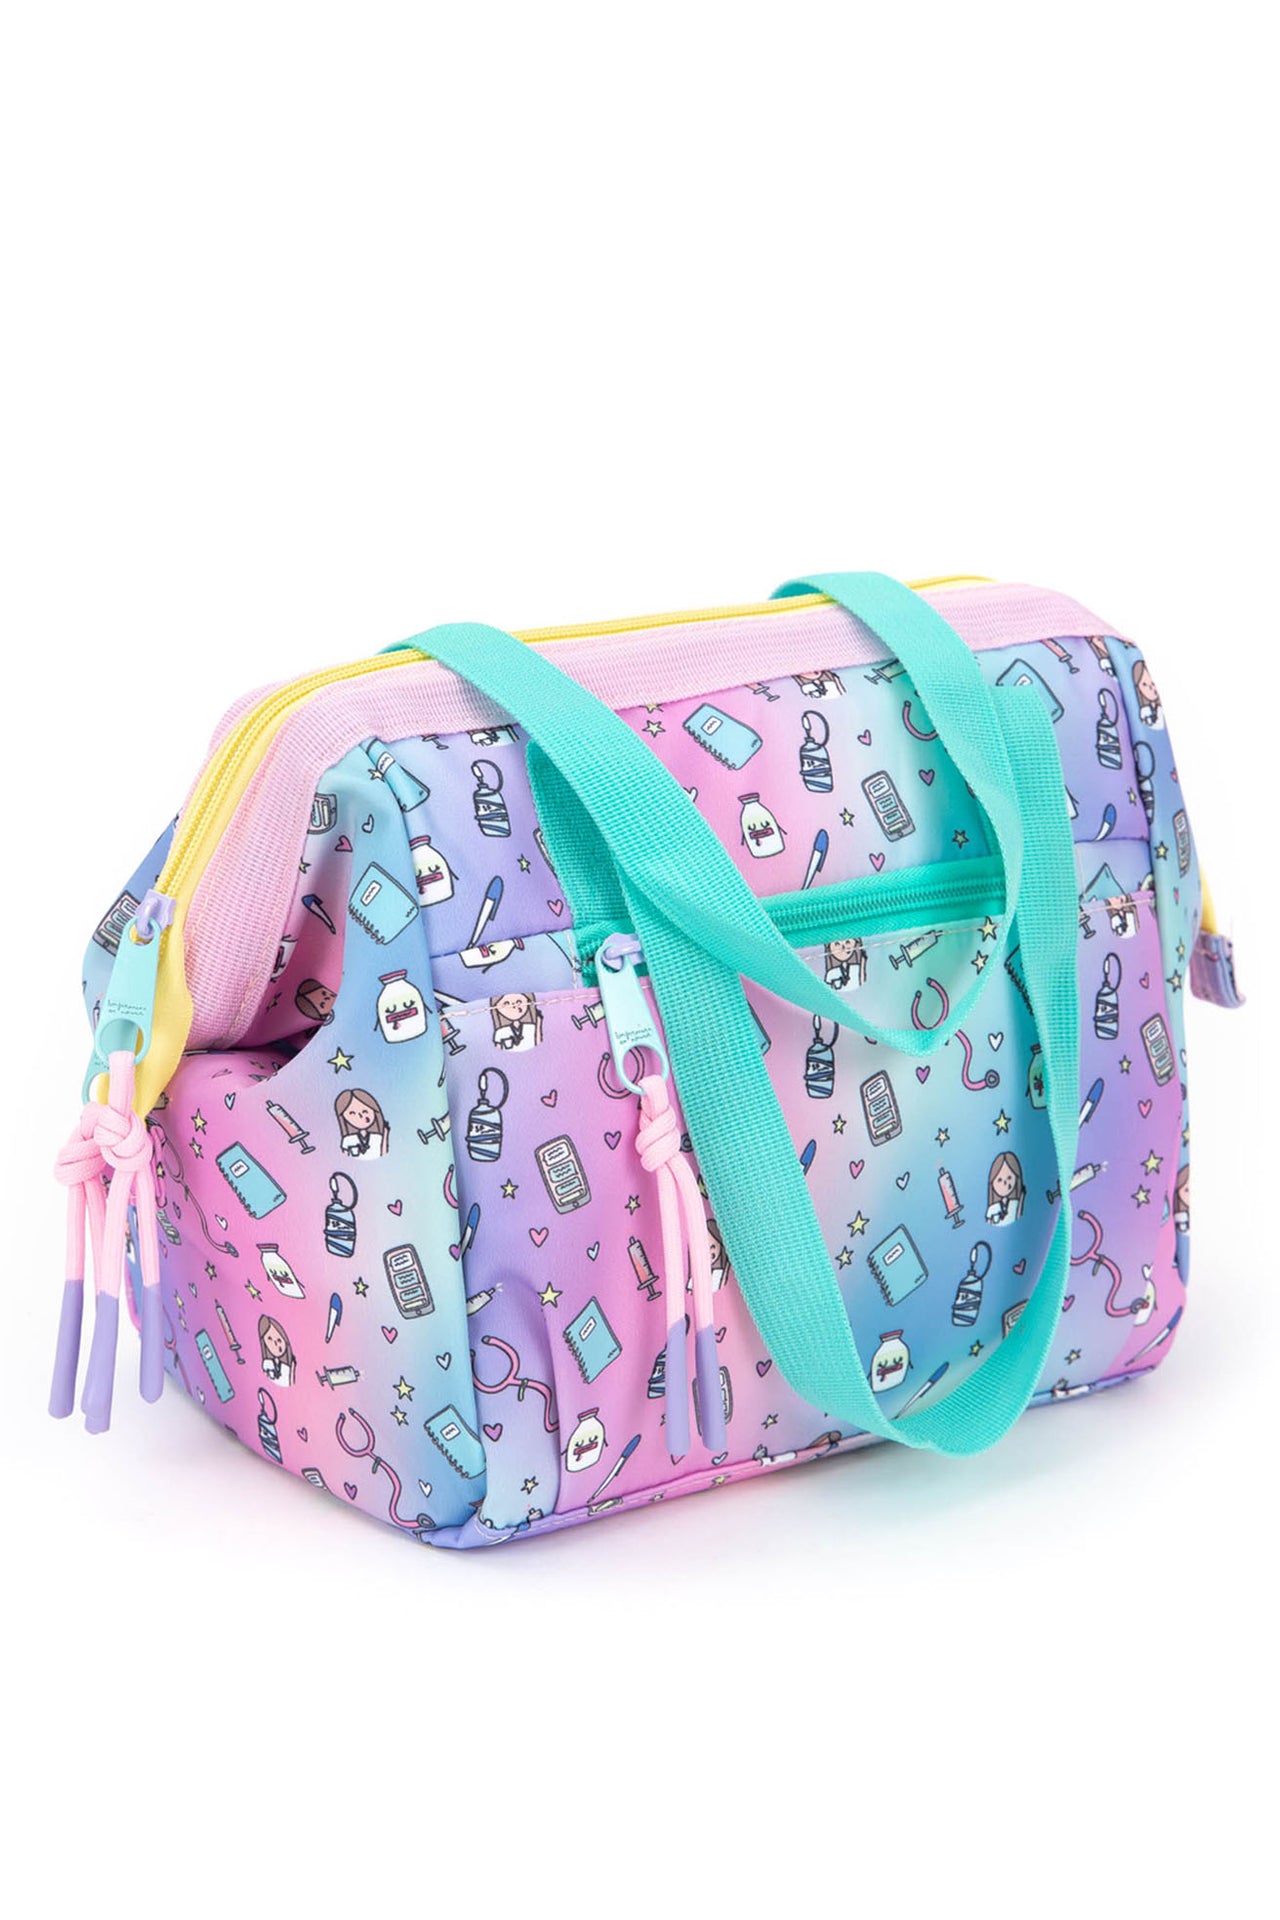 LUNCH BAG WITH HANDLES - RAINBOW 🌈